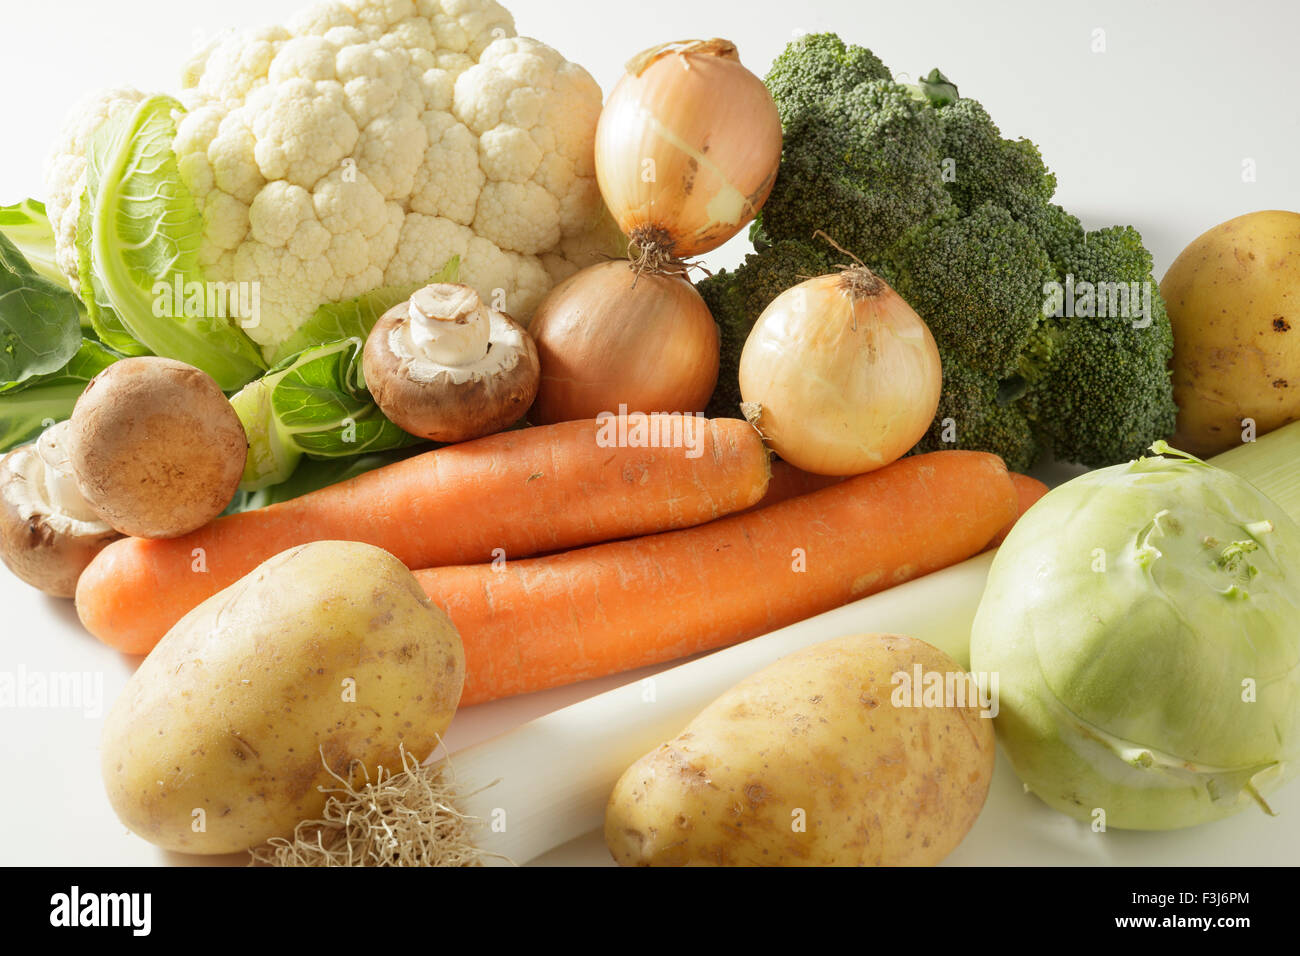 selection of winter vegetables Stock Photo